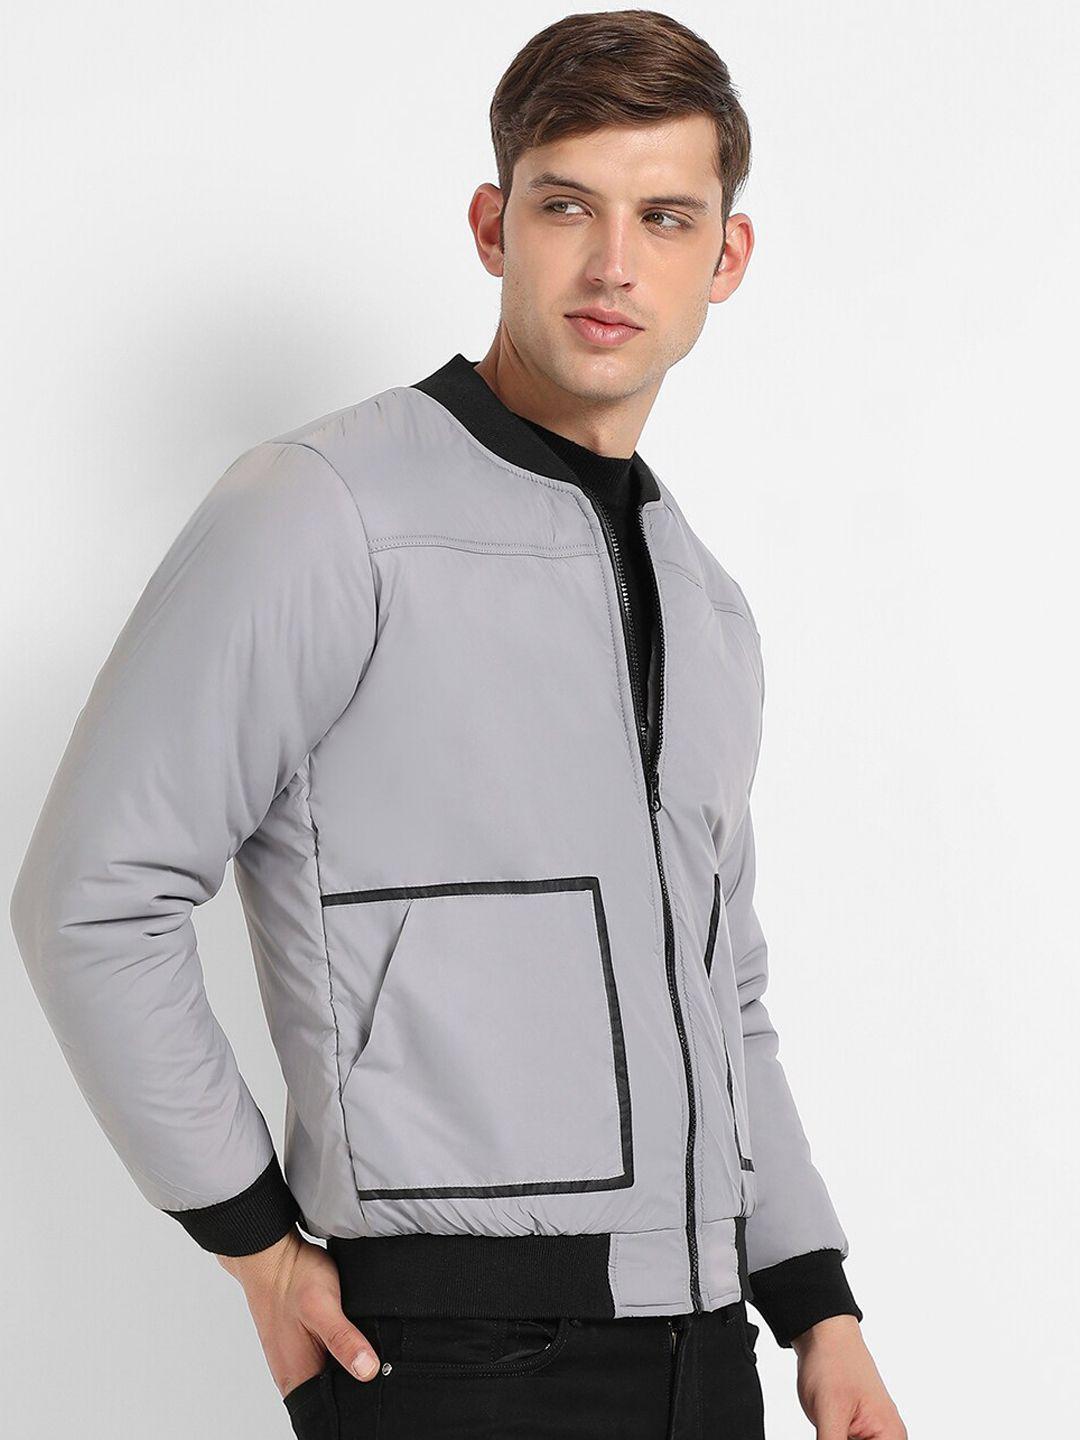 campus sutra windcheater outdoor sporty jacket